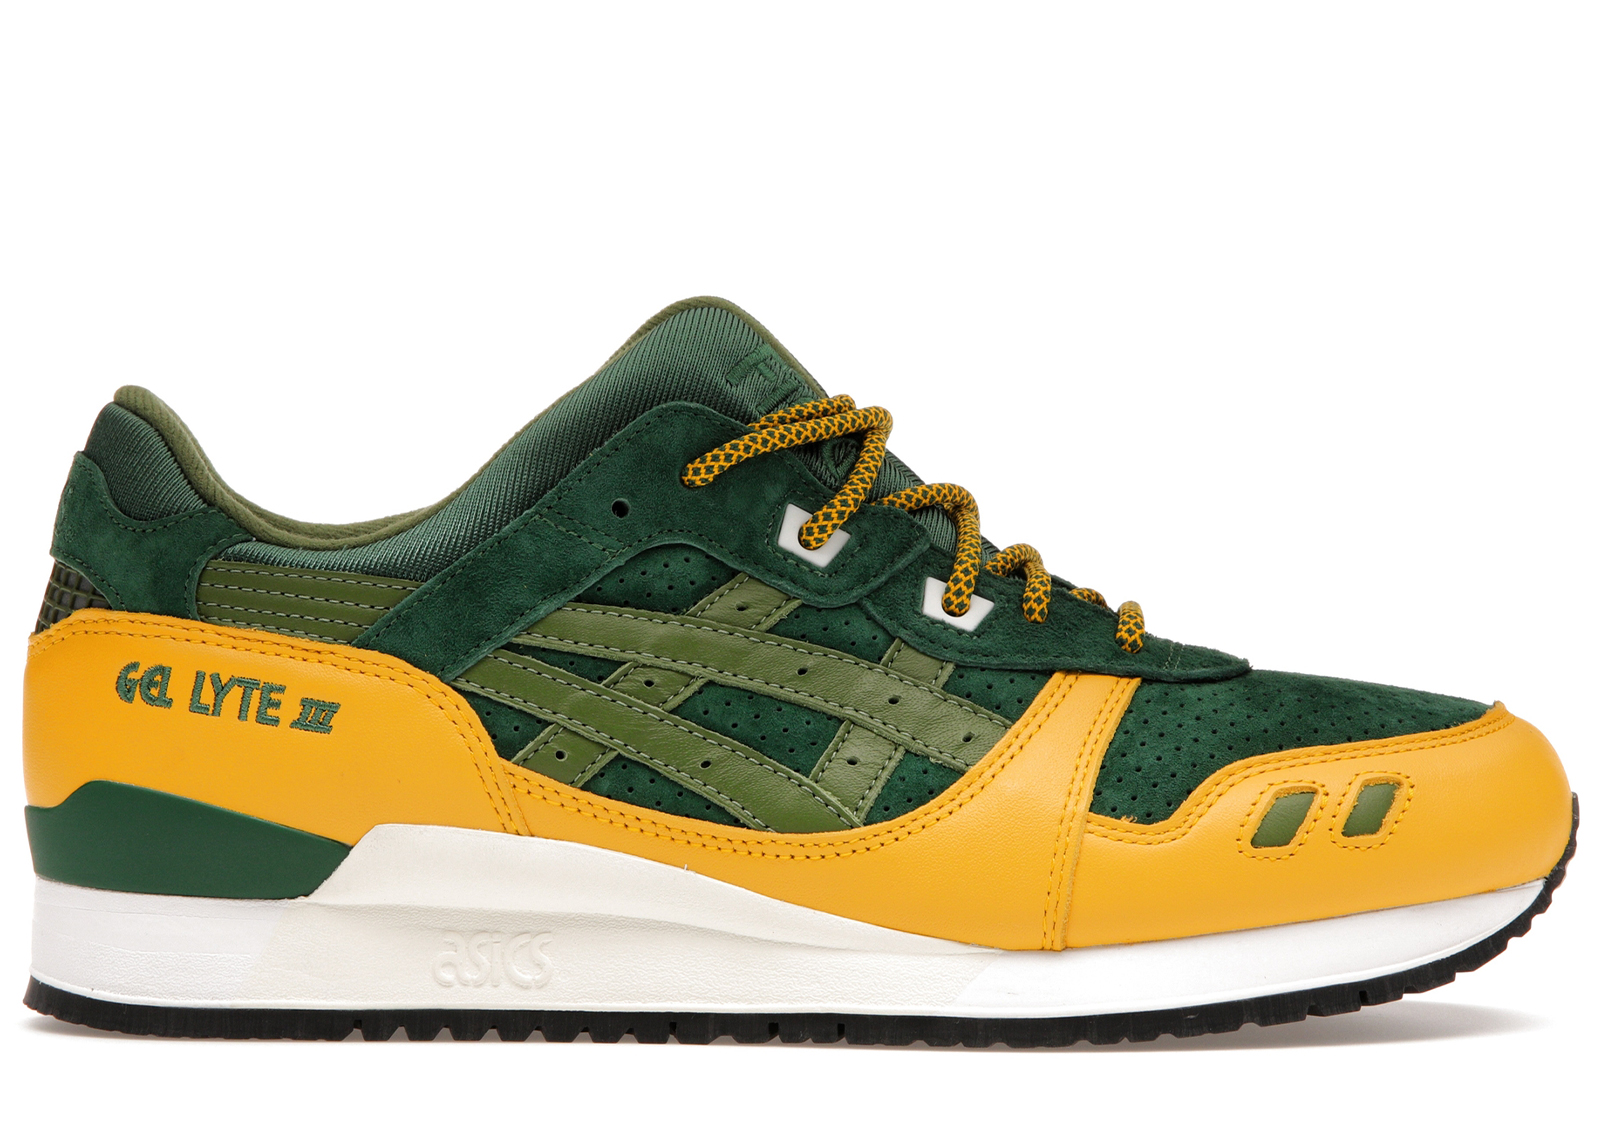 ASICS Gel-Lyte III '07 Remastered Kith Marvel X-Men Rogue Opened Box  (Trading Card Not Included)